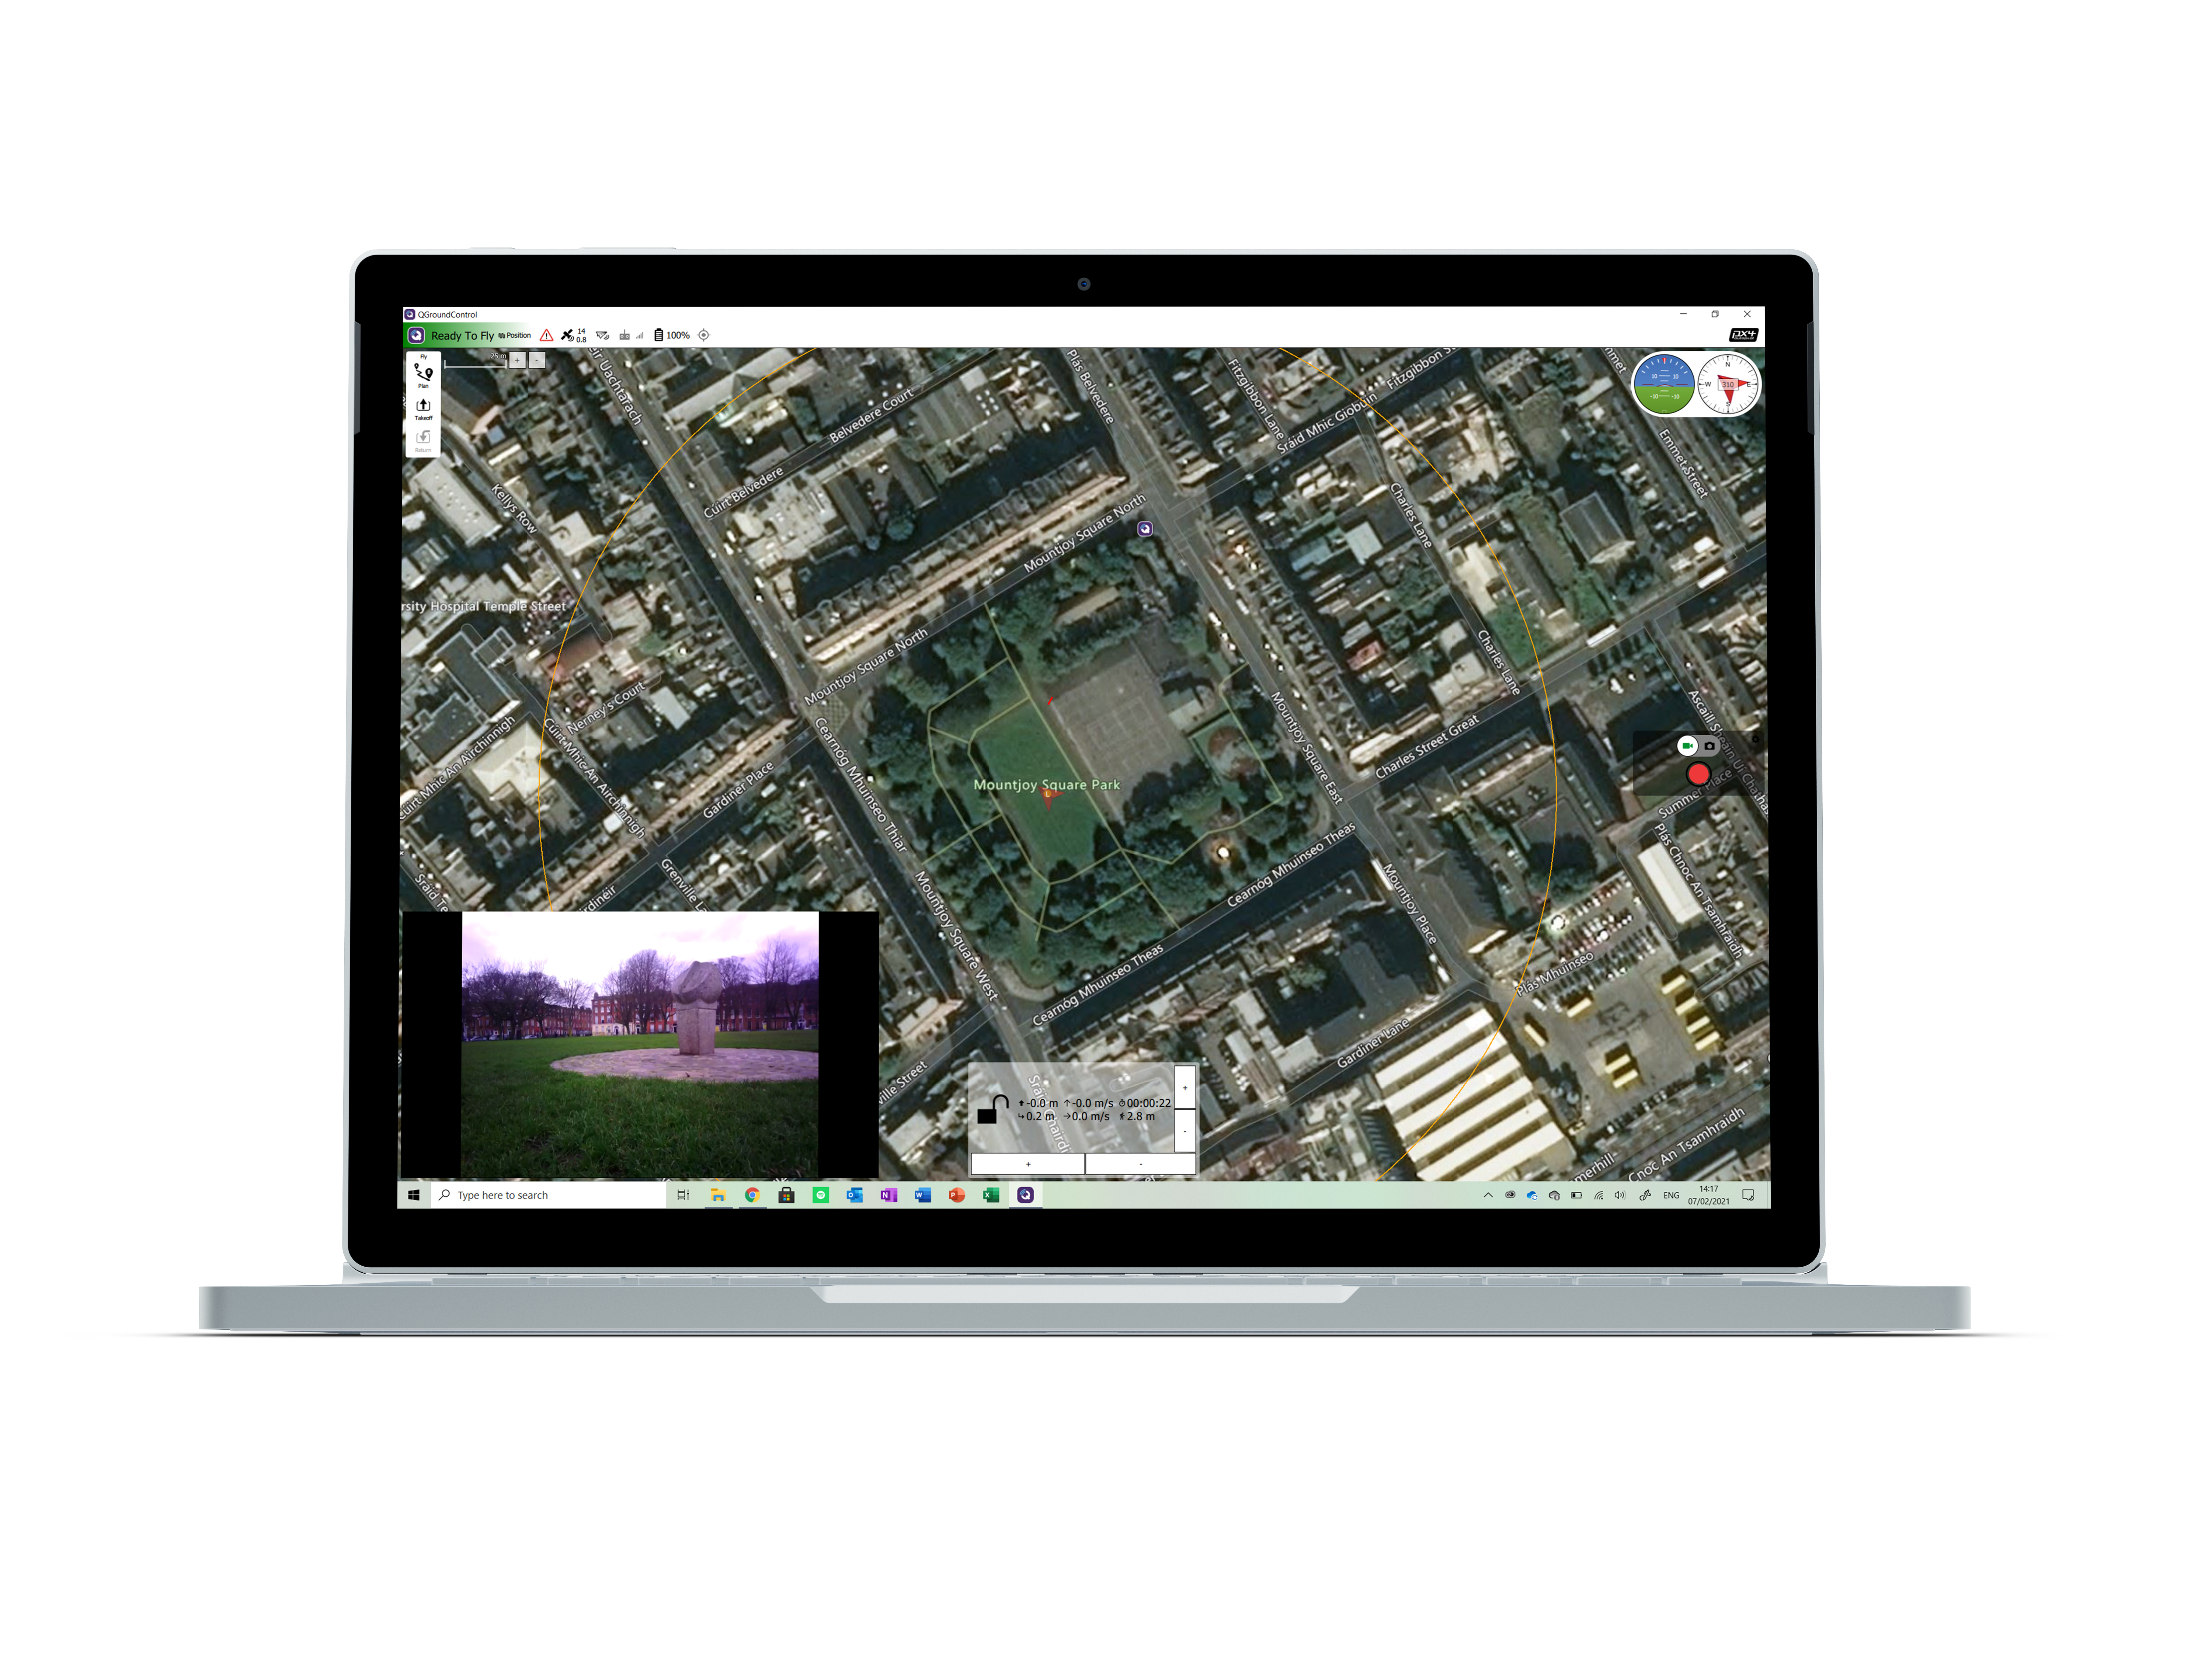 can a usb gps receiver work with pc laptop to graph a path on google maps